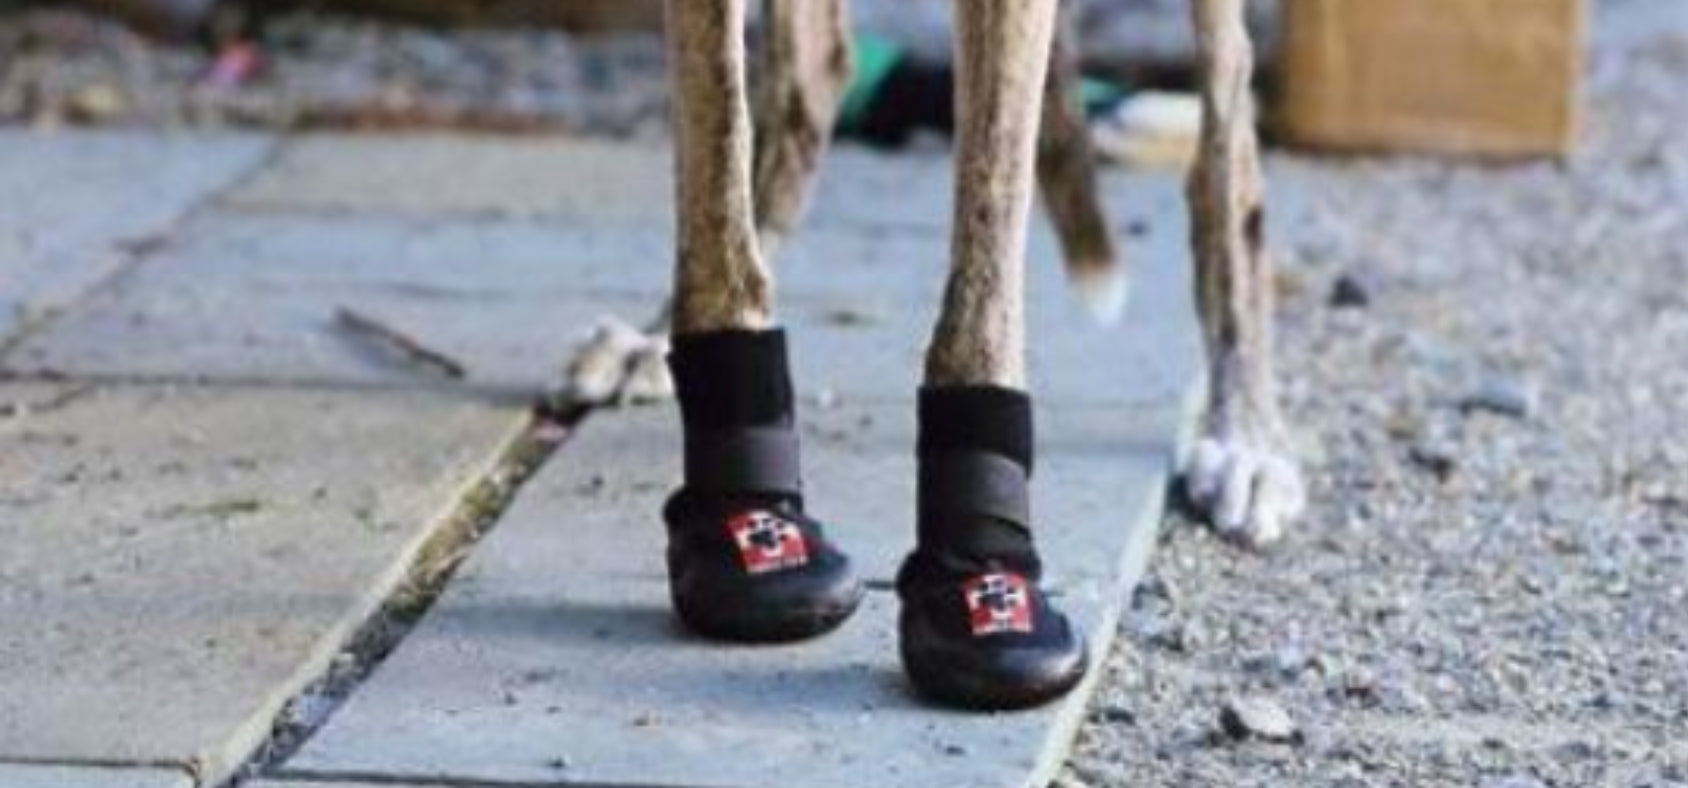 Therapaws Dog Boots